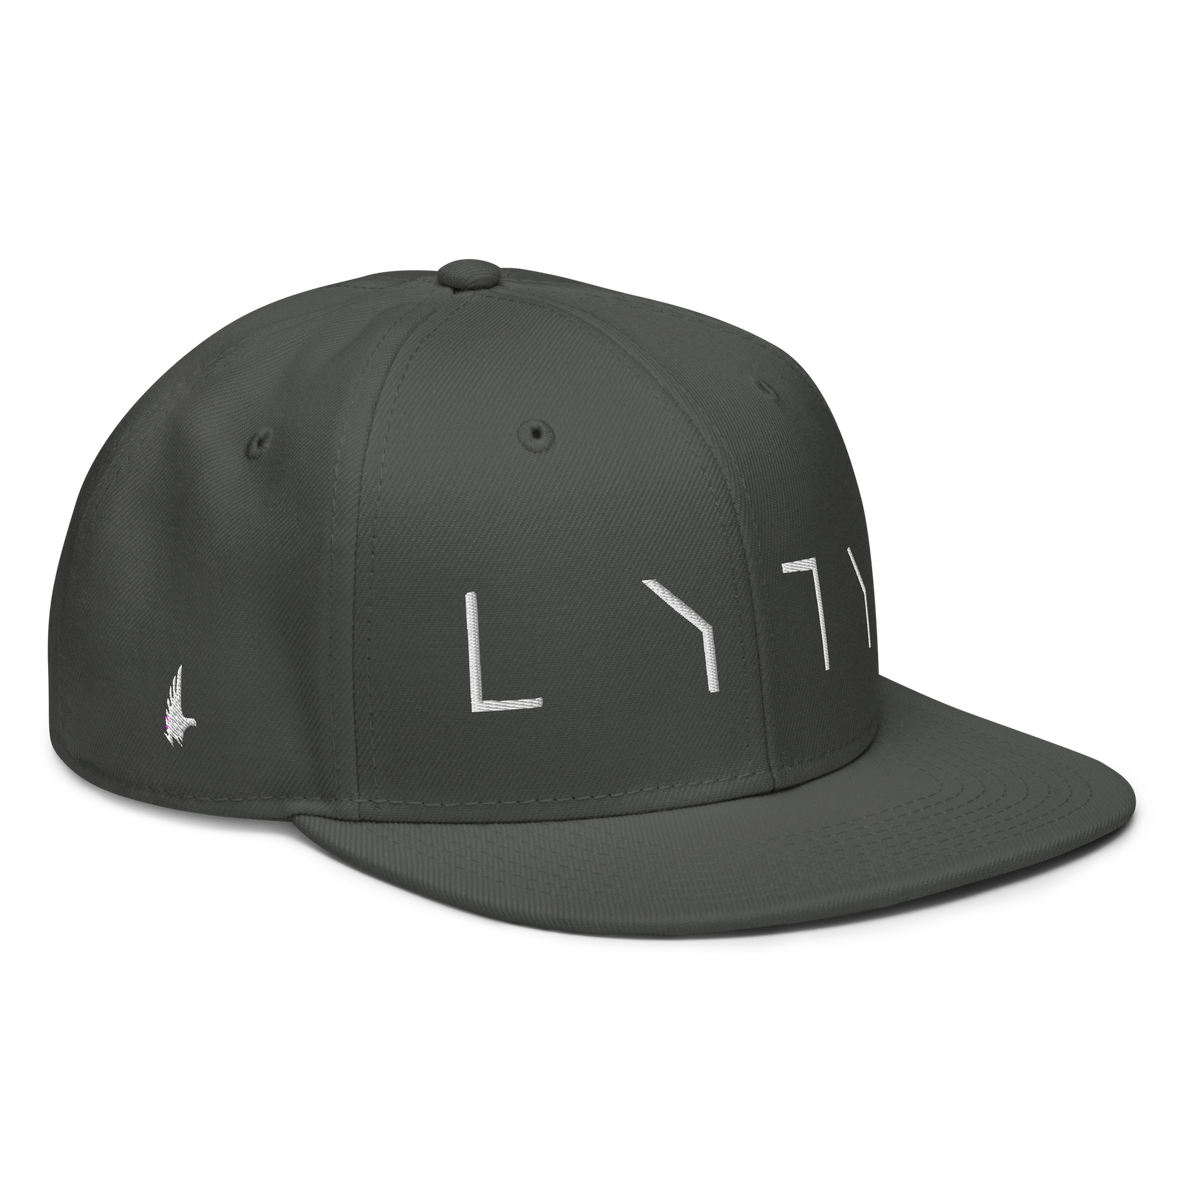 LYTY Snapback Hat - Charcoal Grey OS - Loyalty Vibes